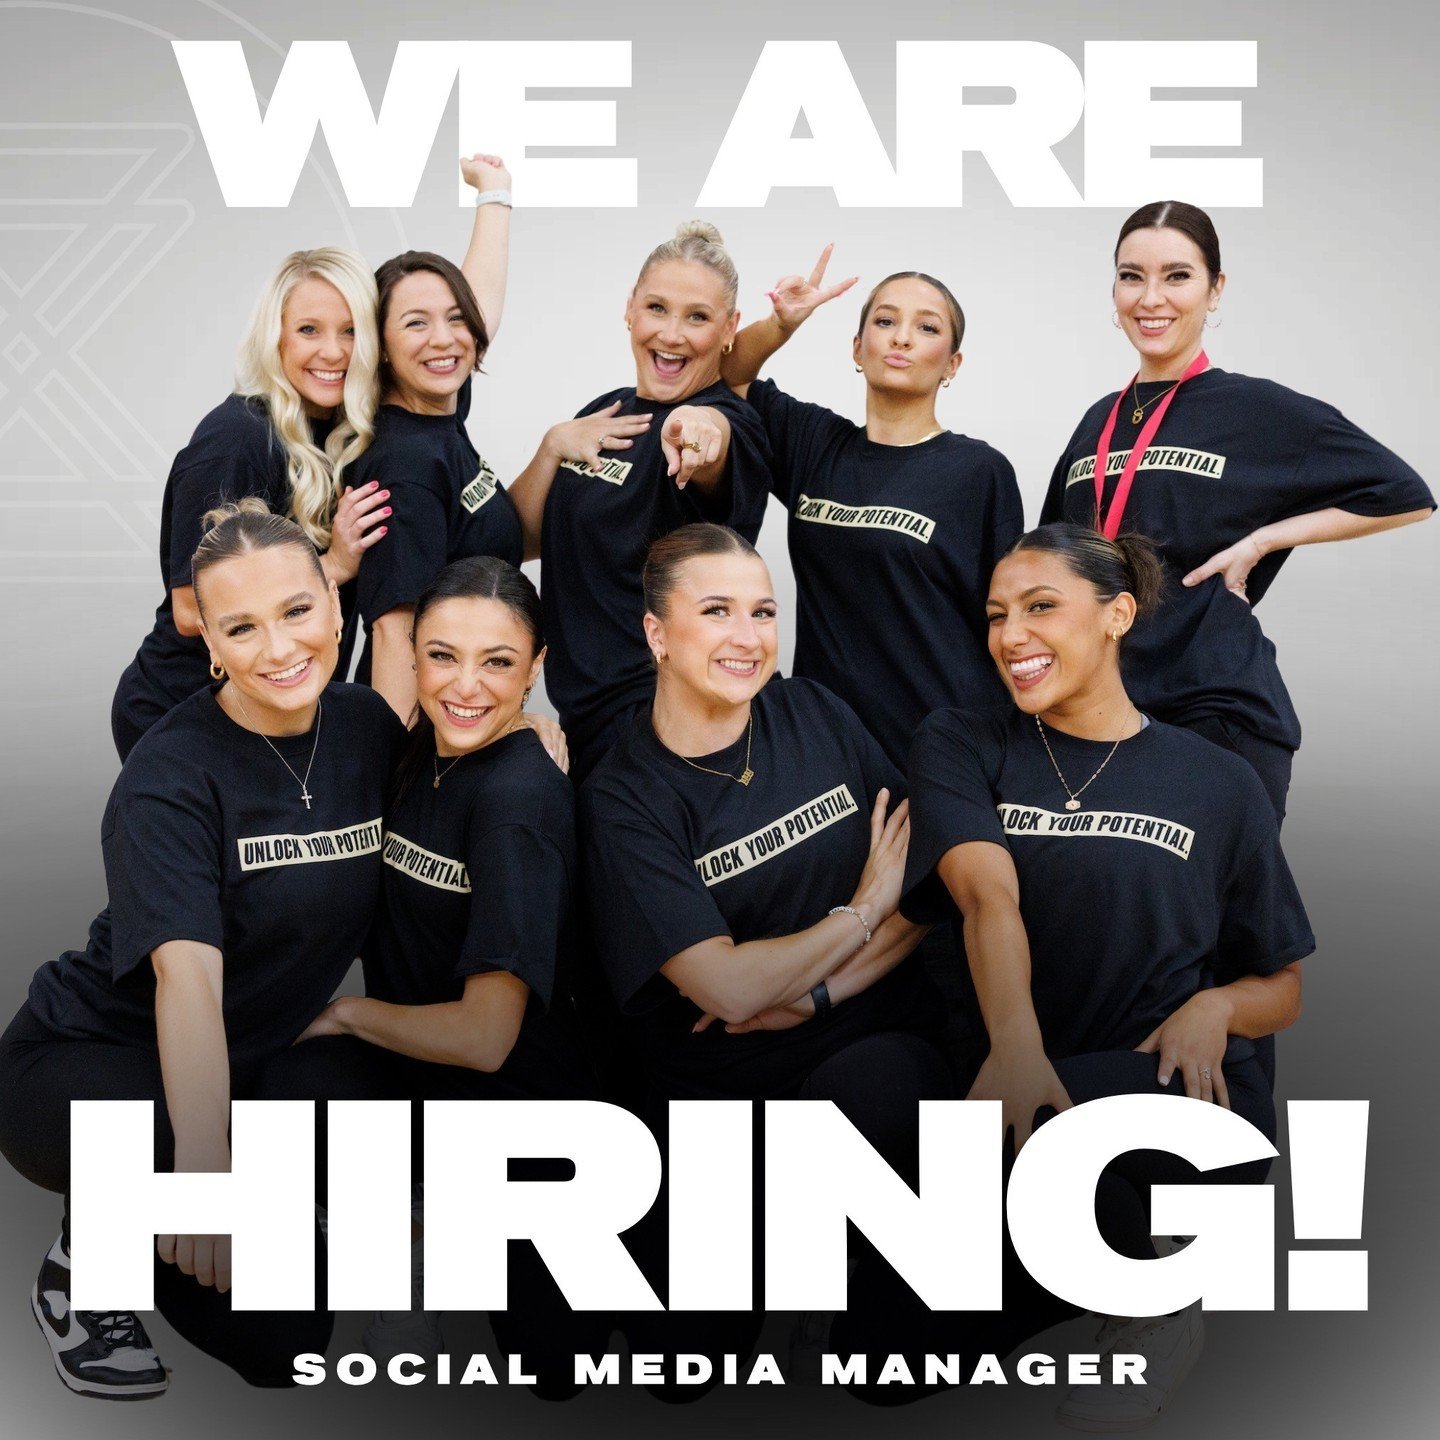 You heard it here first... We are HIRING! 📢⁠
⁠
If you are interested in becoming our new ✨SOCIAL MEDIA MANAGER✨, head to the link in our bio to:⁠
⁠
1️⃣Read through the job description to see if you will be a great fit for this role⁠
⁠
2️⃣Submit your